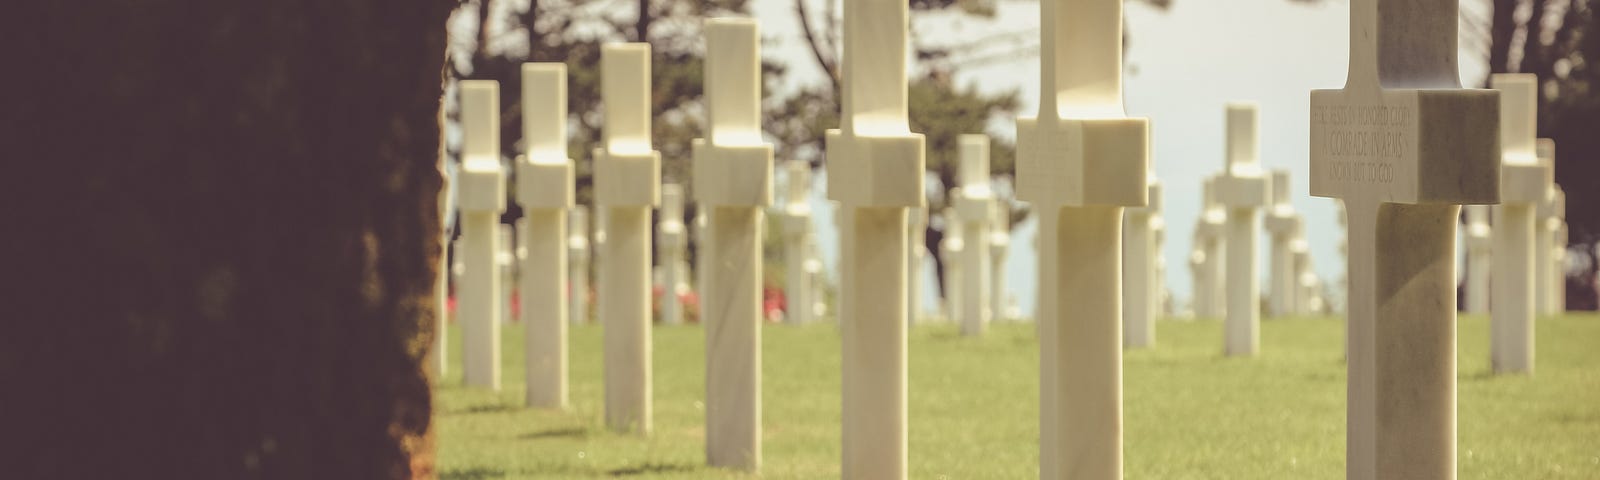 A row of cross-shaped tombstones, the closest of which has an American flag at its base